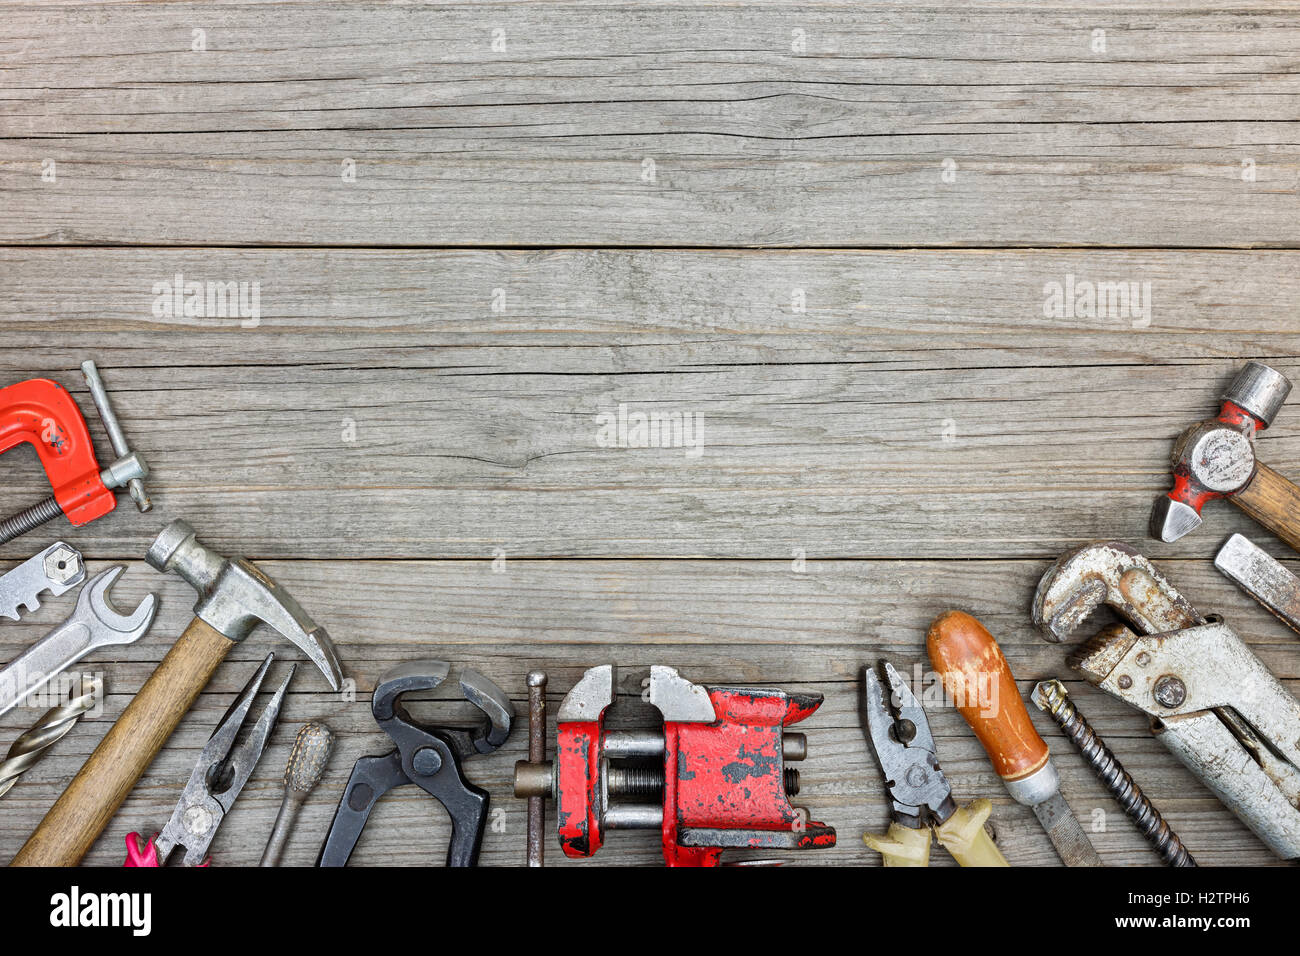 old grungy tool set including hammers, drills, pliers, wrenches and clamps on gray wooden boards background Stock Photo